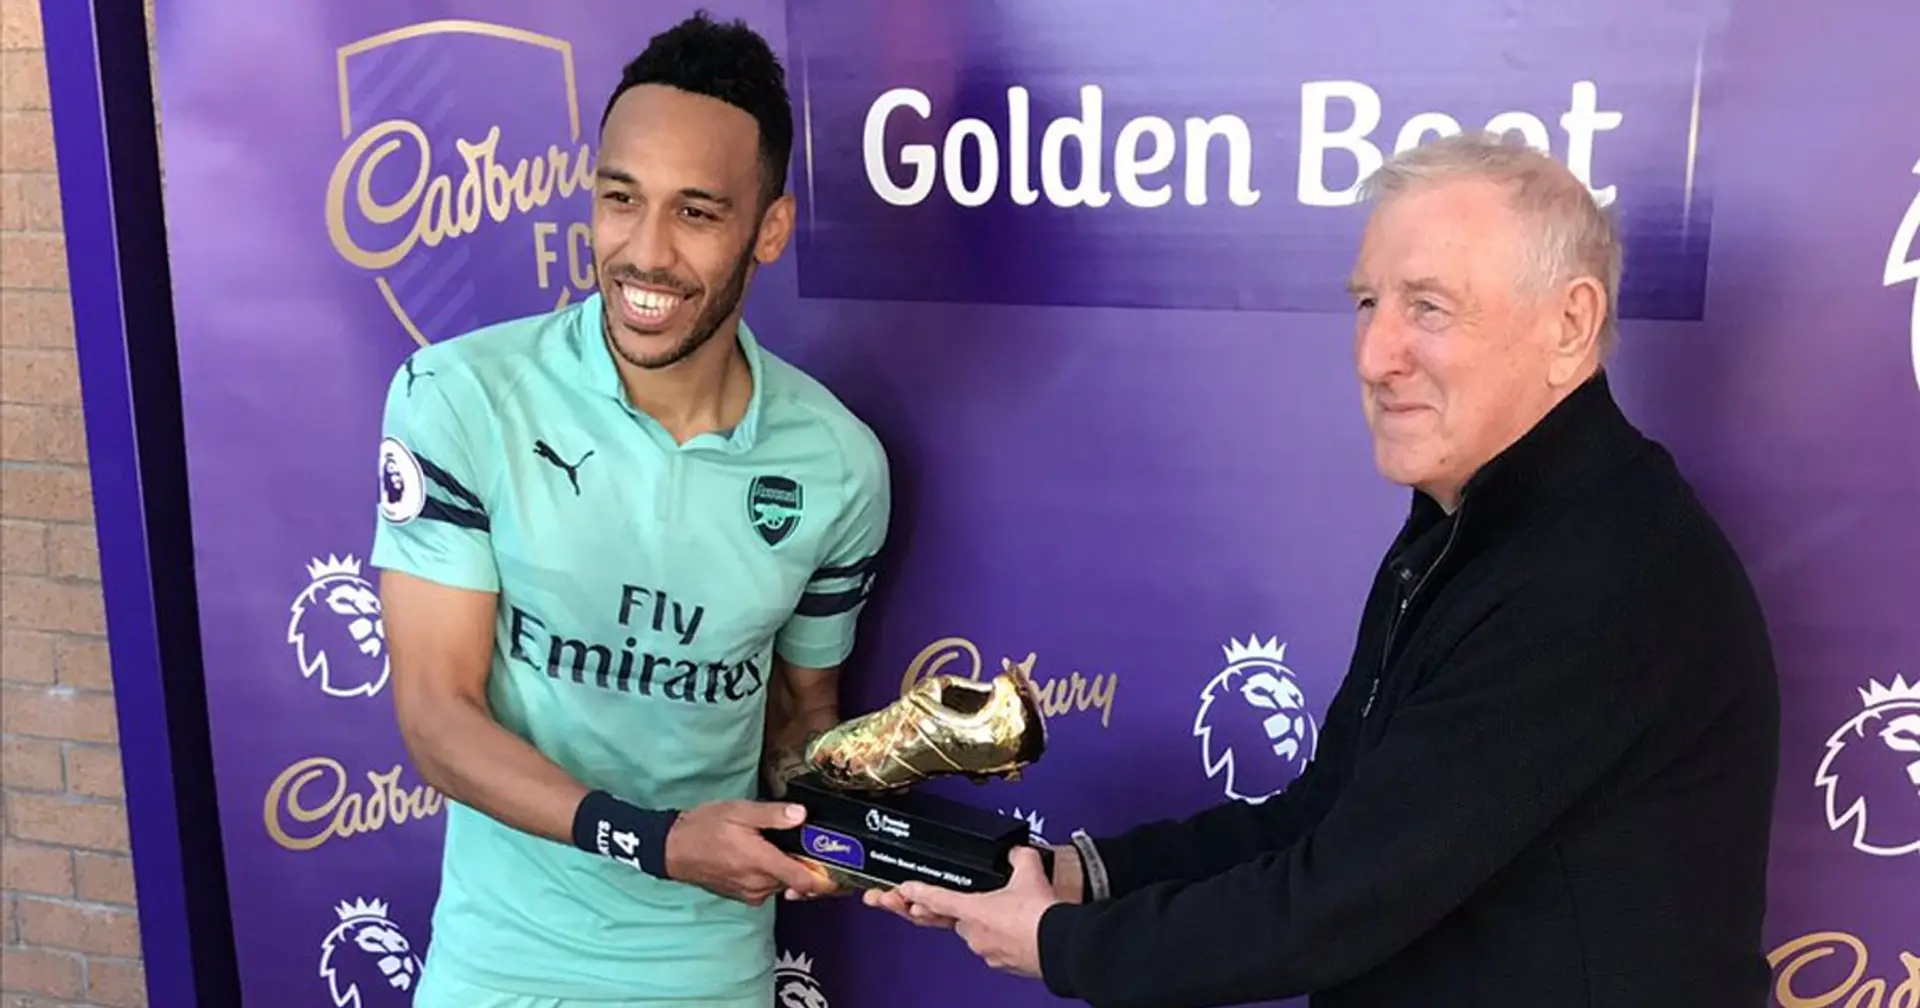 On this day one year ago: Auba wins Golden Foot in a shared triumph for Africa